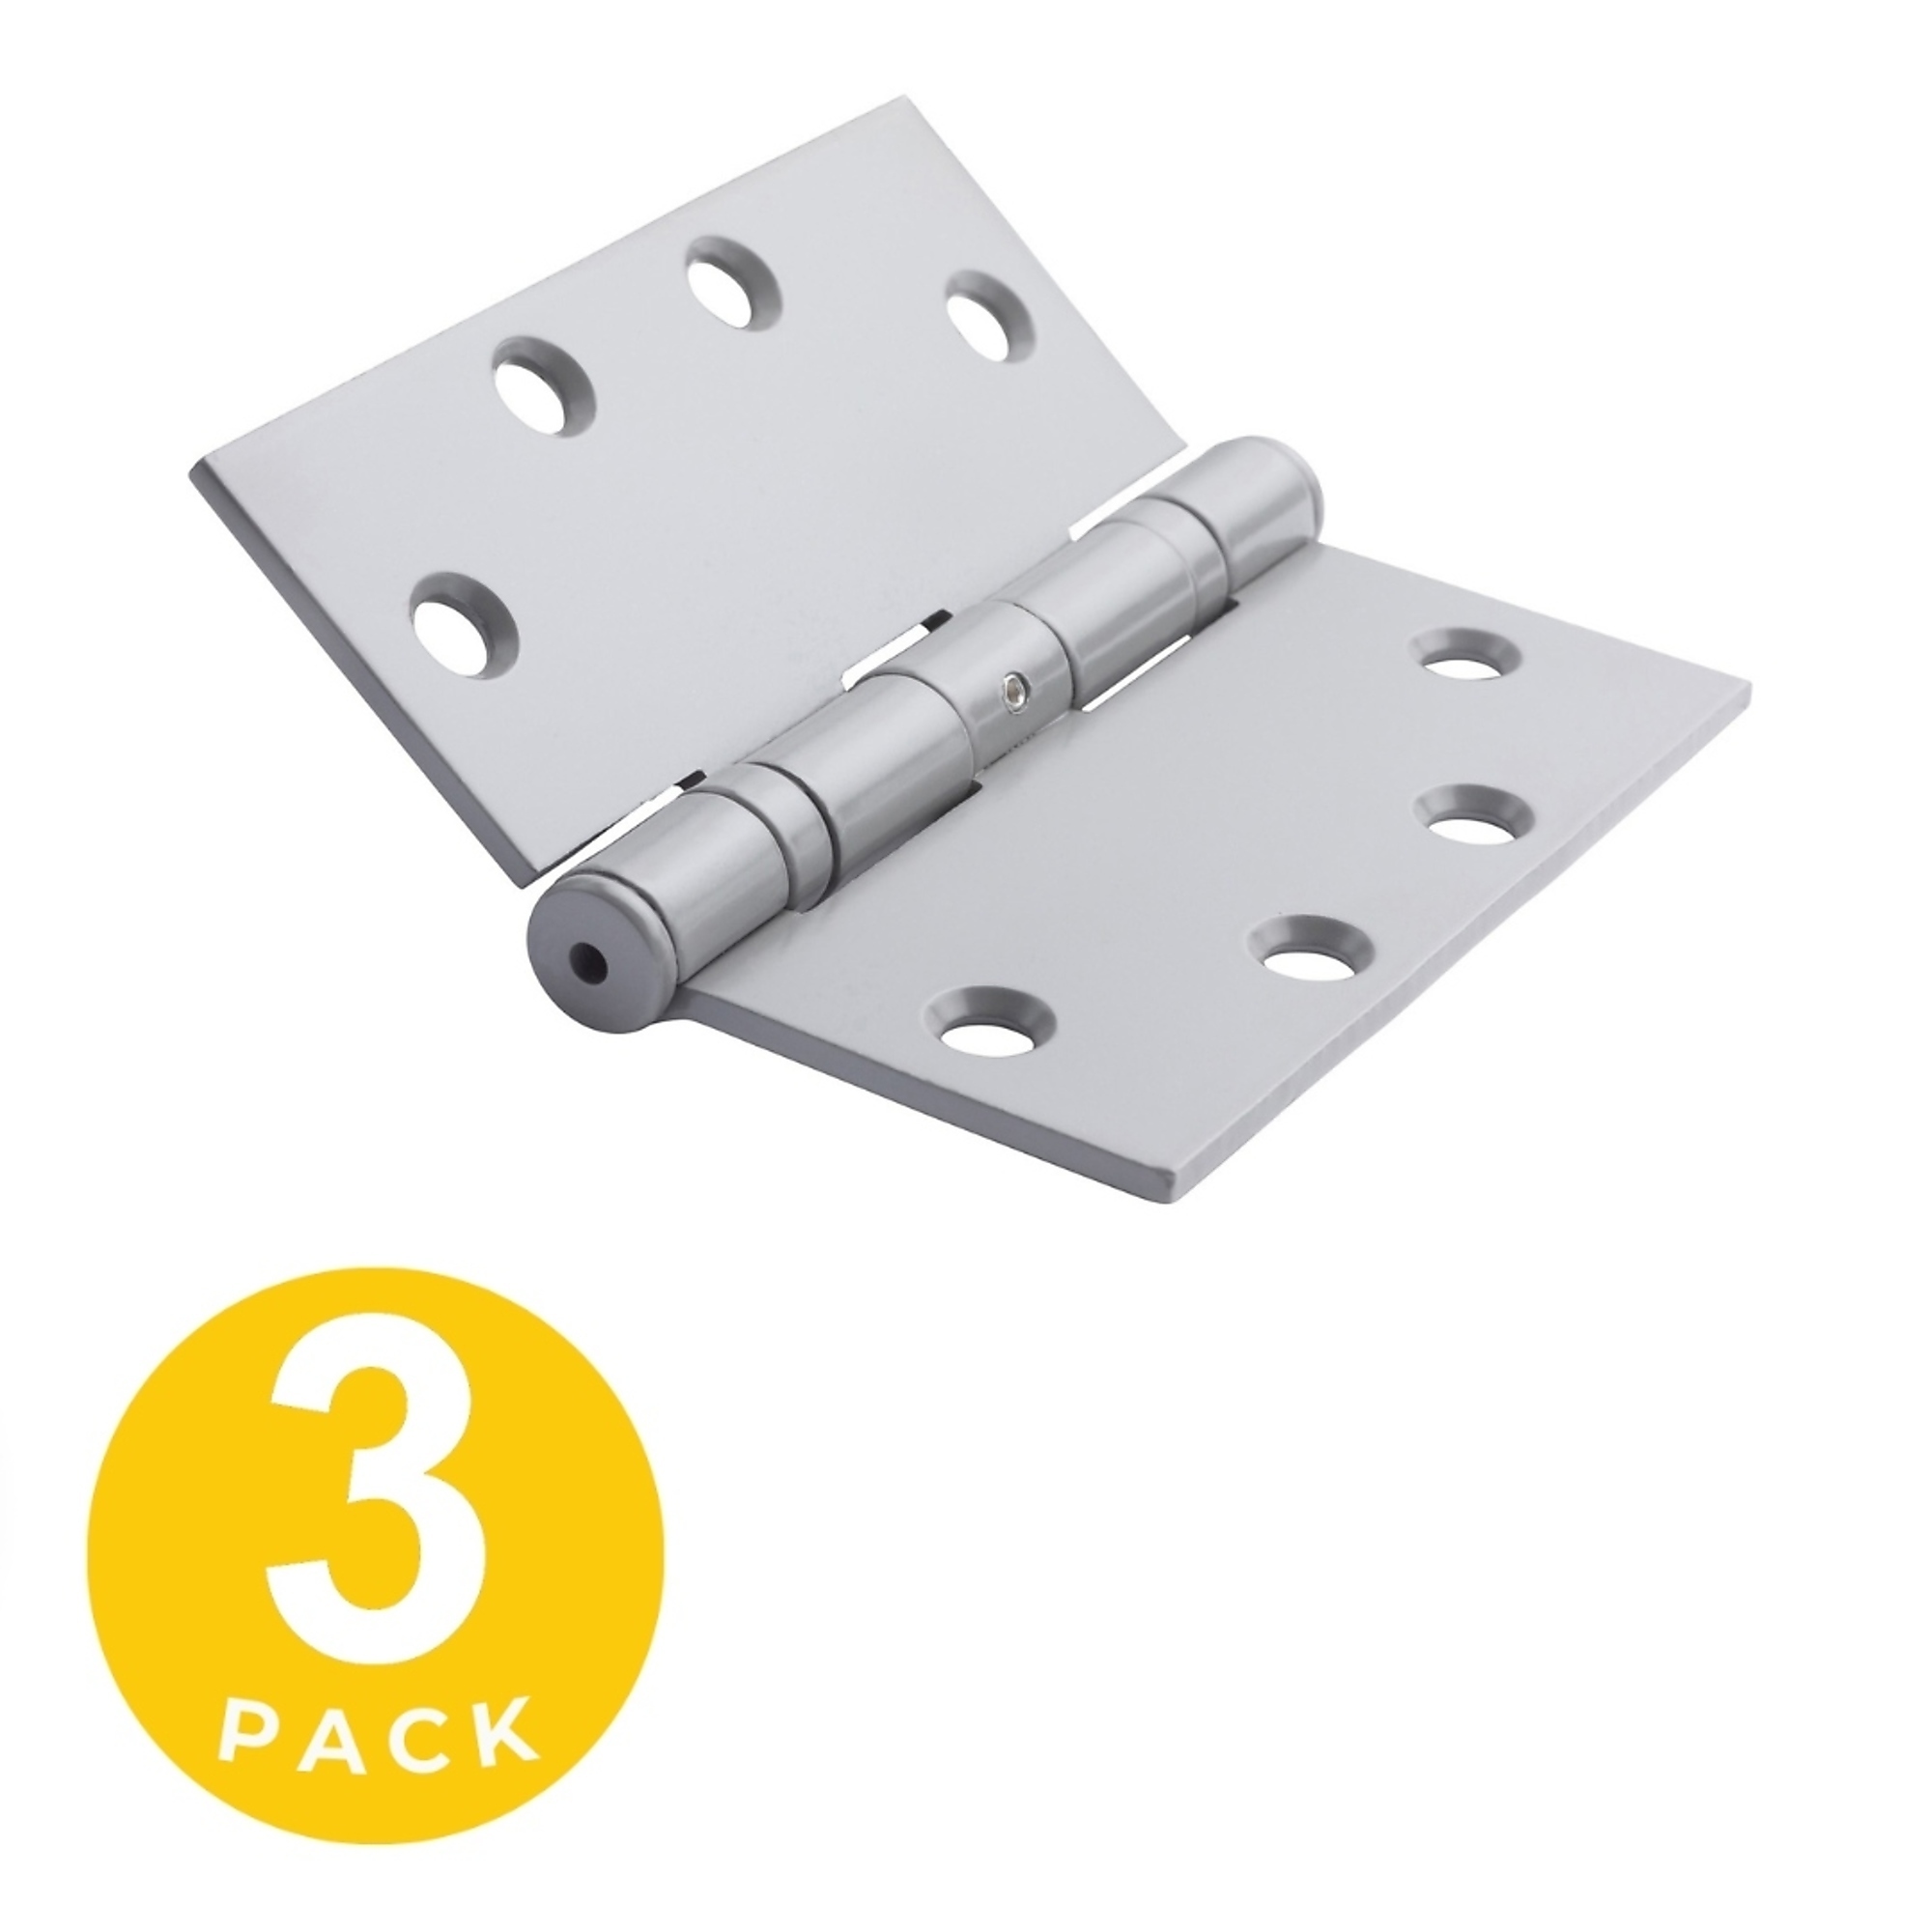 Global Door Controls, 4.5Inch x 4.5Inch Mortise Squared Hinge - Set of 3 Model CP4545BBNRP-USP-3